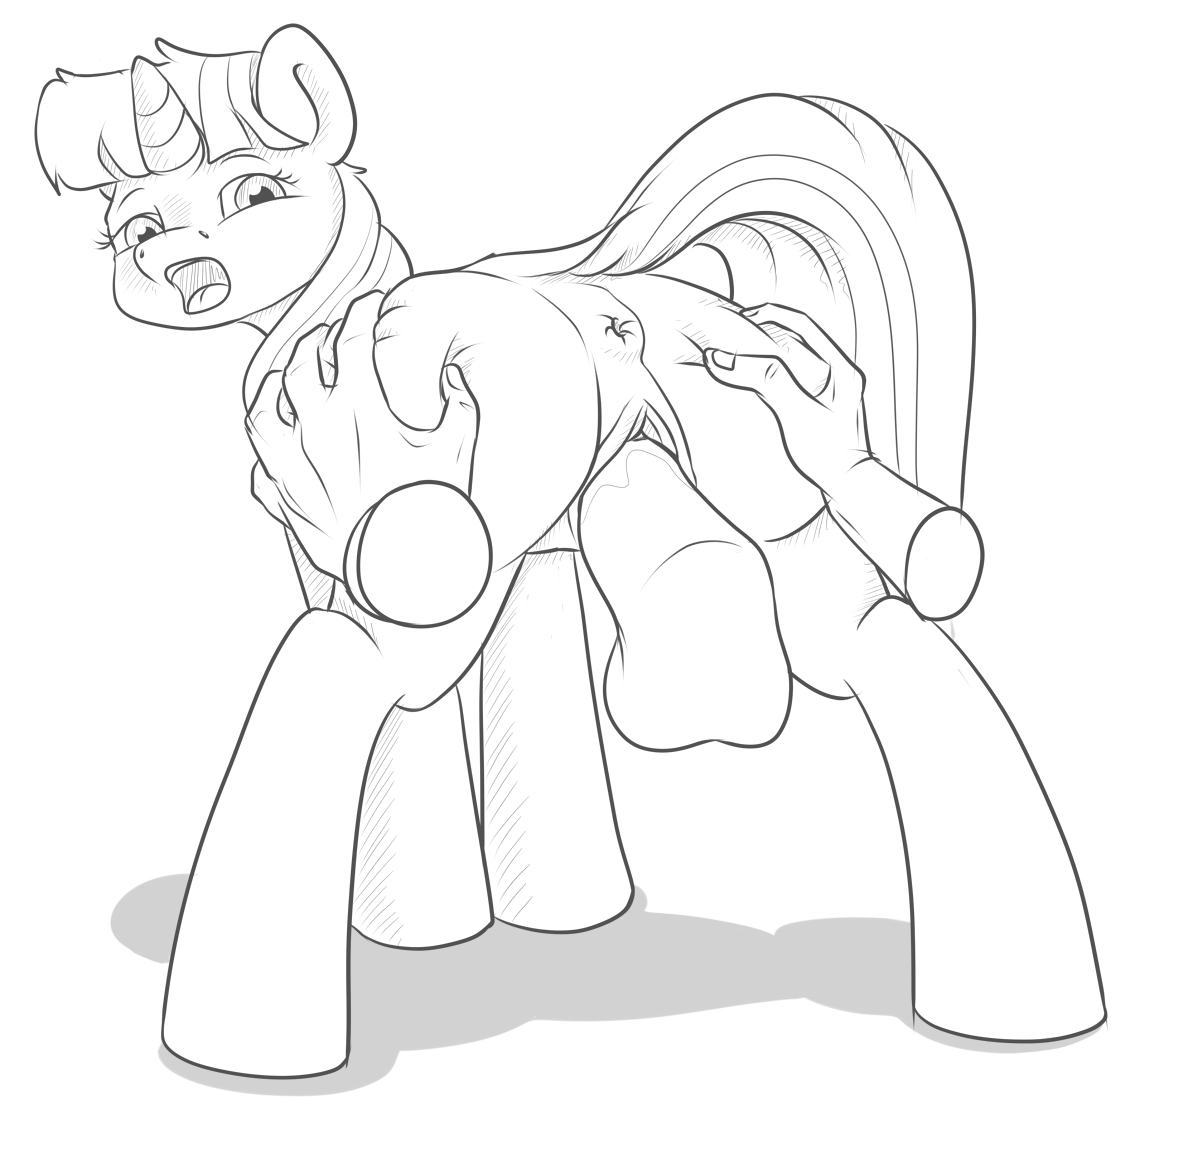 I haven&rsquo;t drawn Twi for a while&hellip;and I really like the &ldquo;squeezing